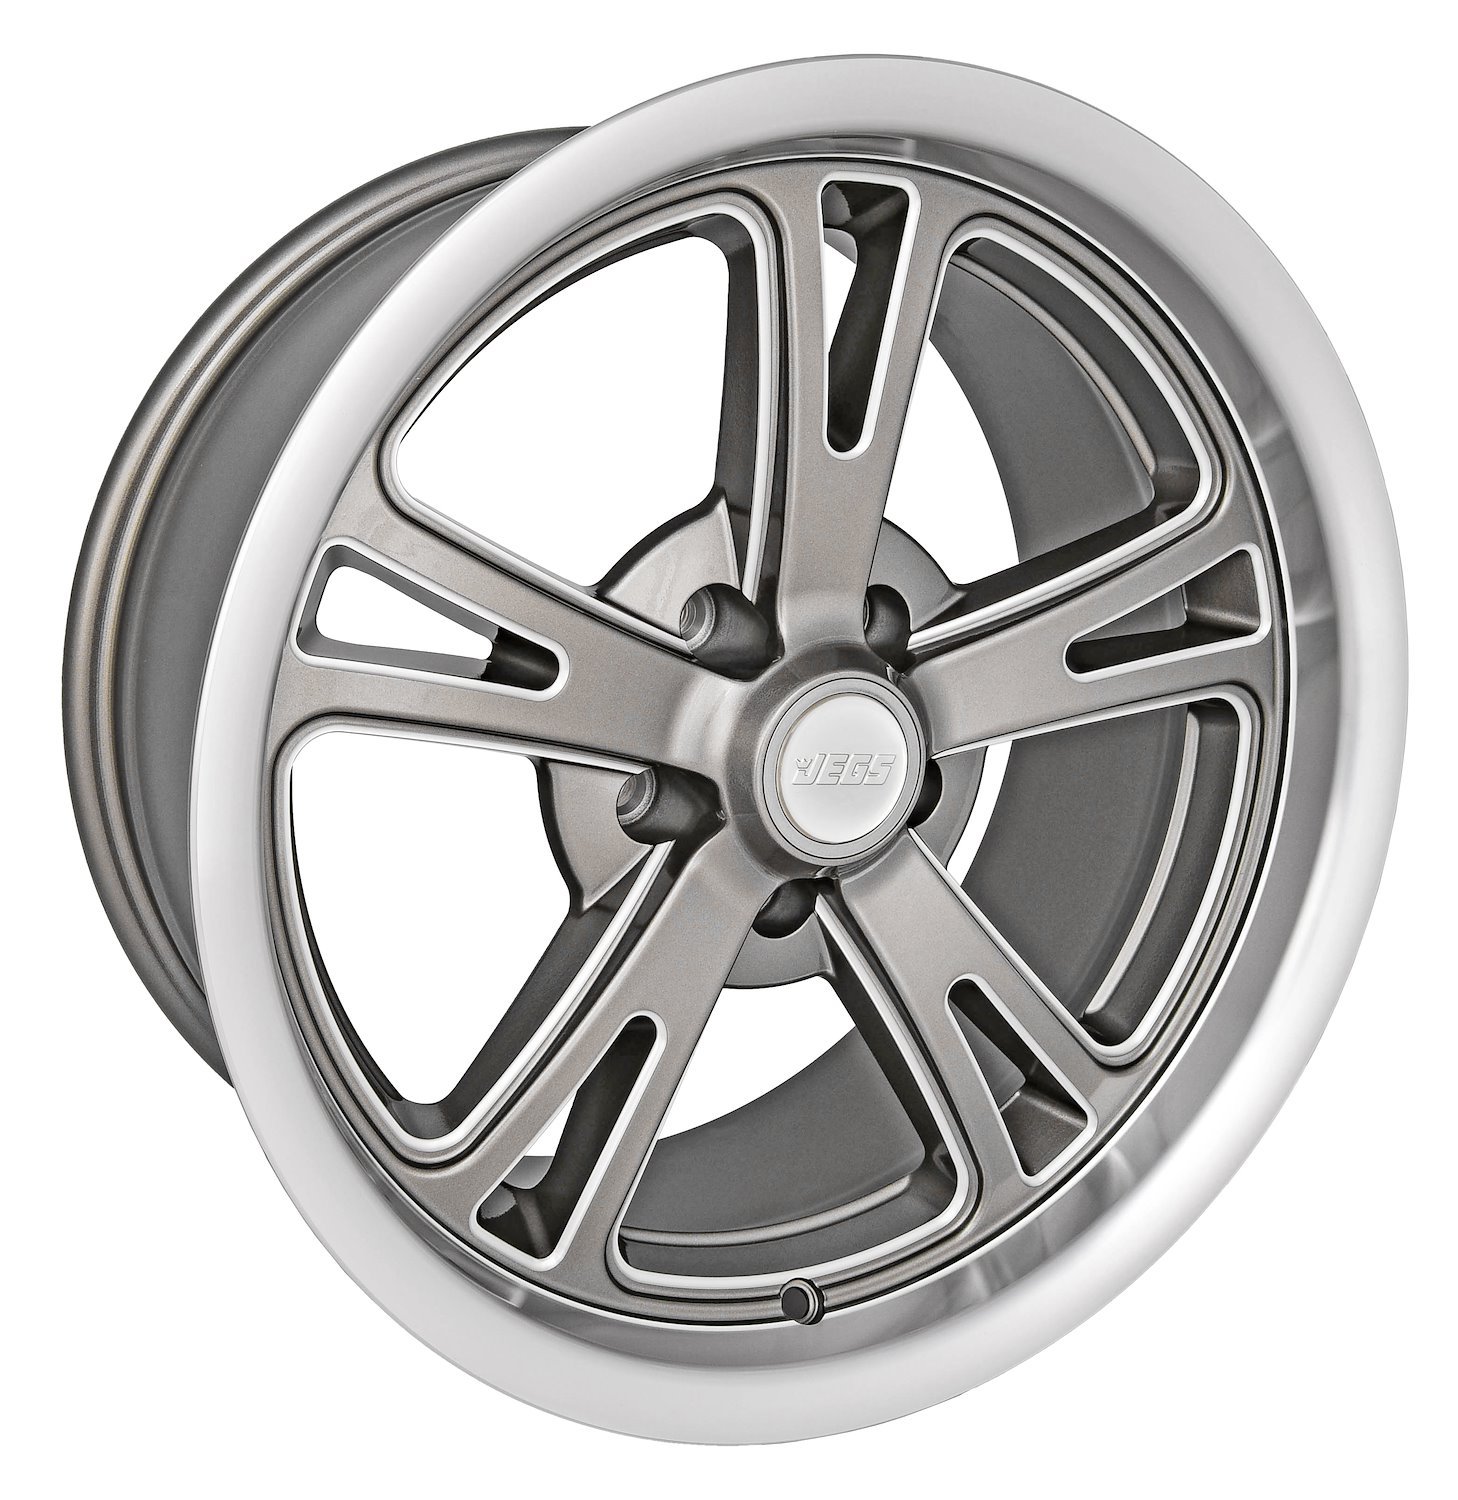 JV-1 Wheel [Size: 17" x 8"] Grey Spokes with Milled Outer Lip